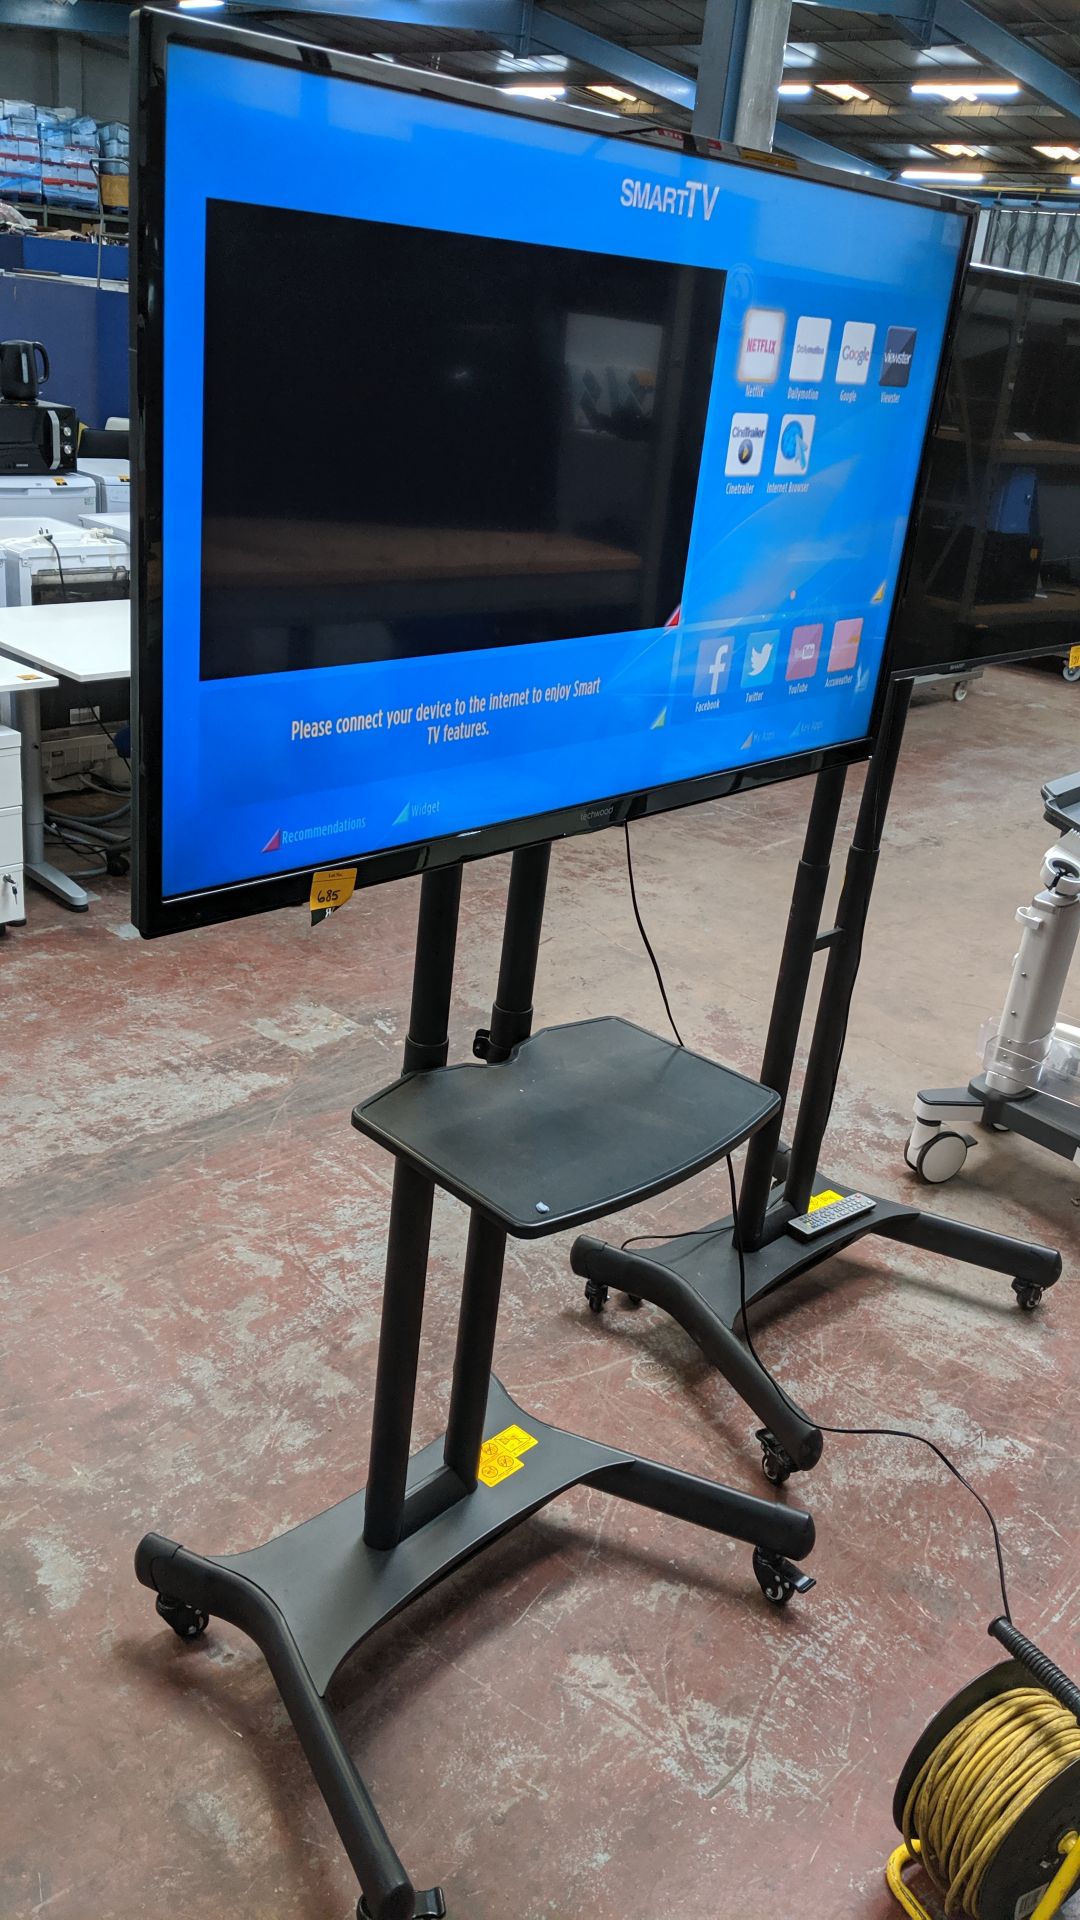 Techwood 49" widescreen LCD TV on mobile stand including shelf & remote control. This is one of a